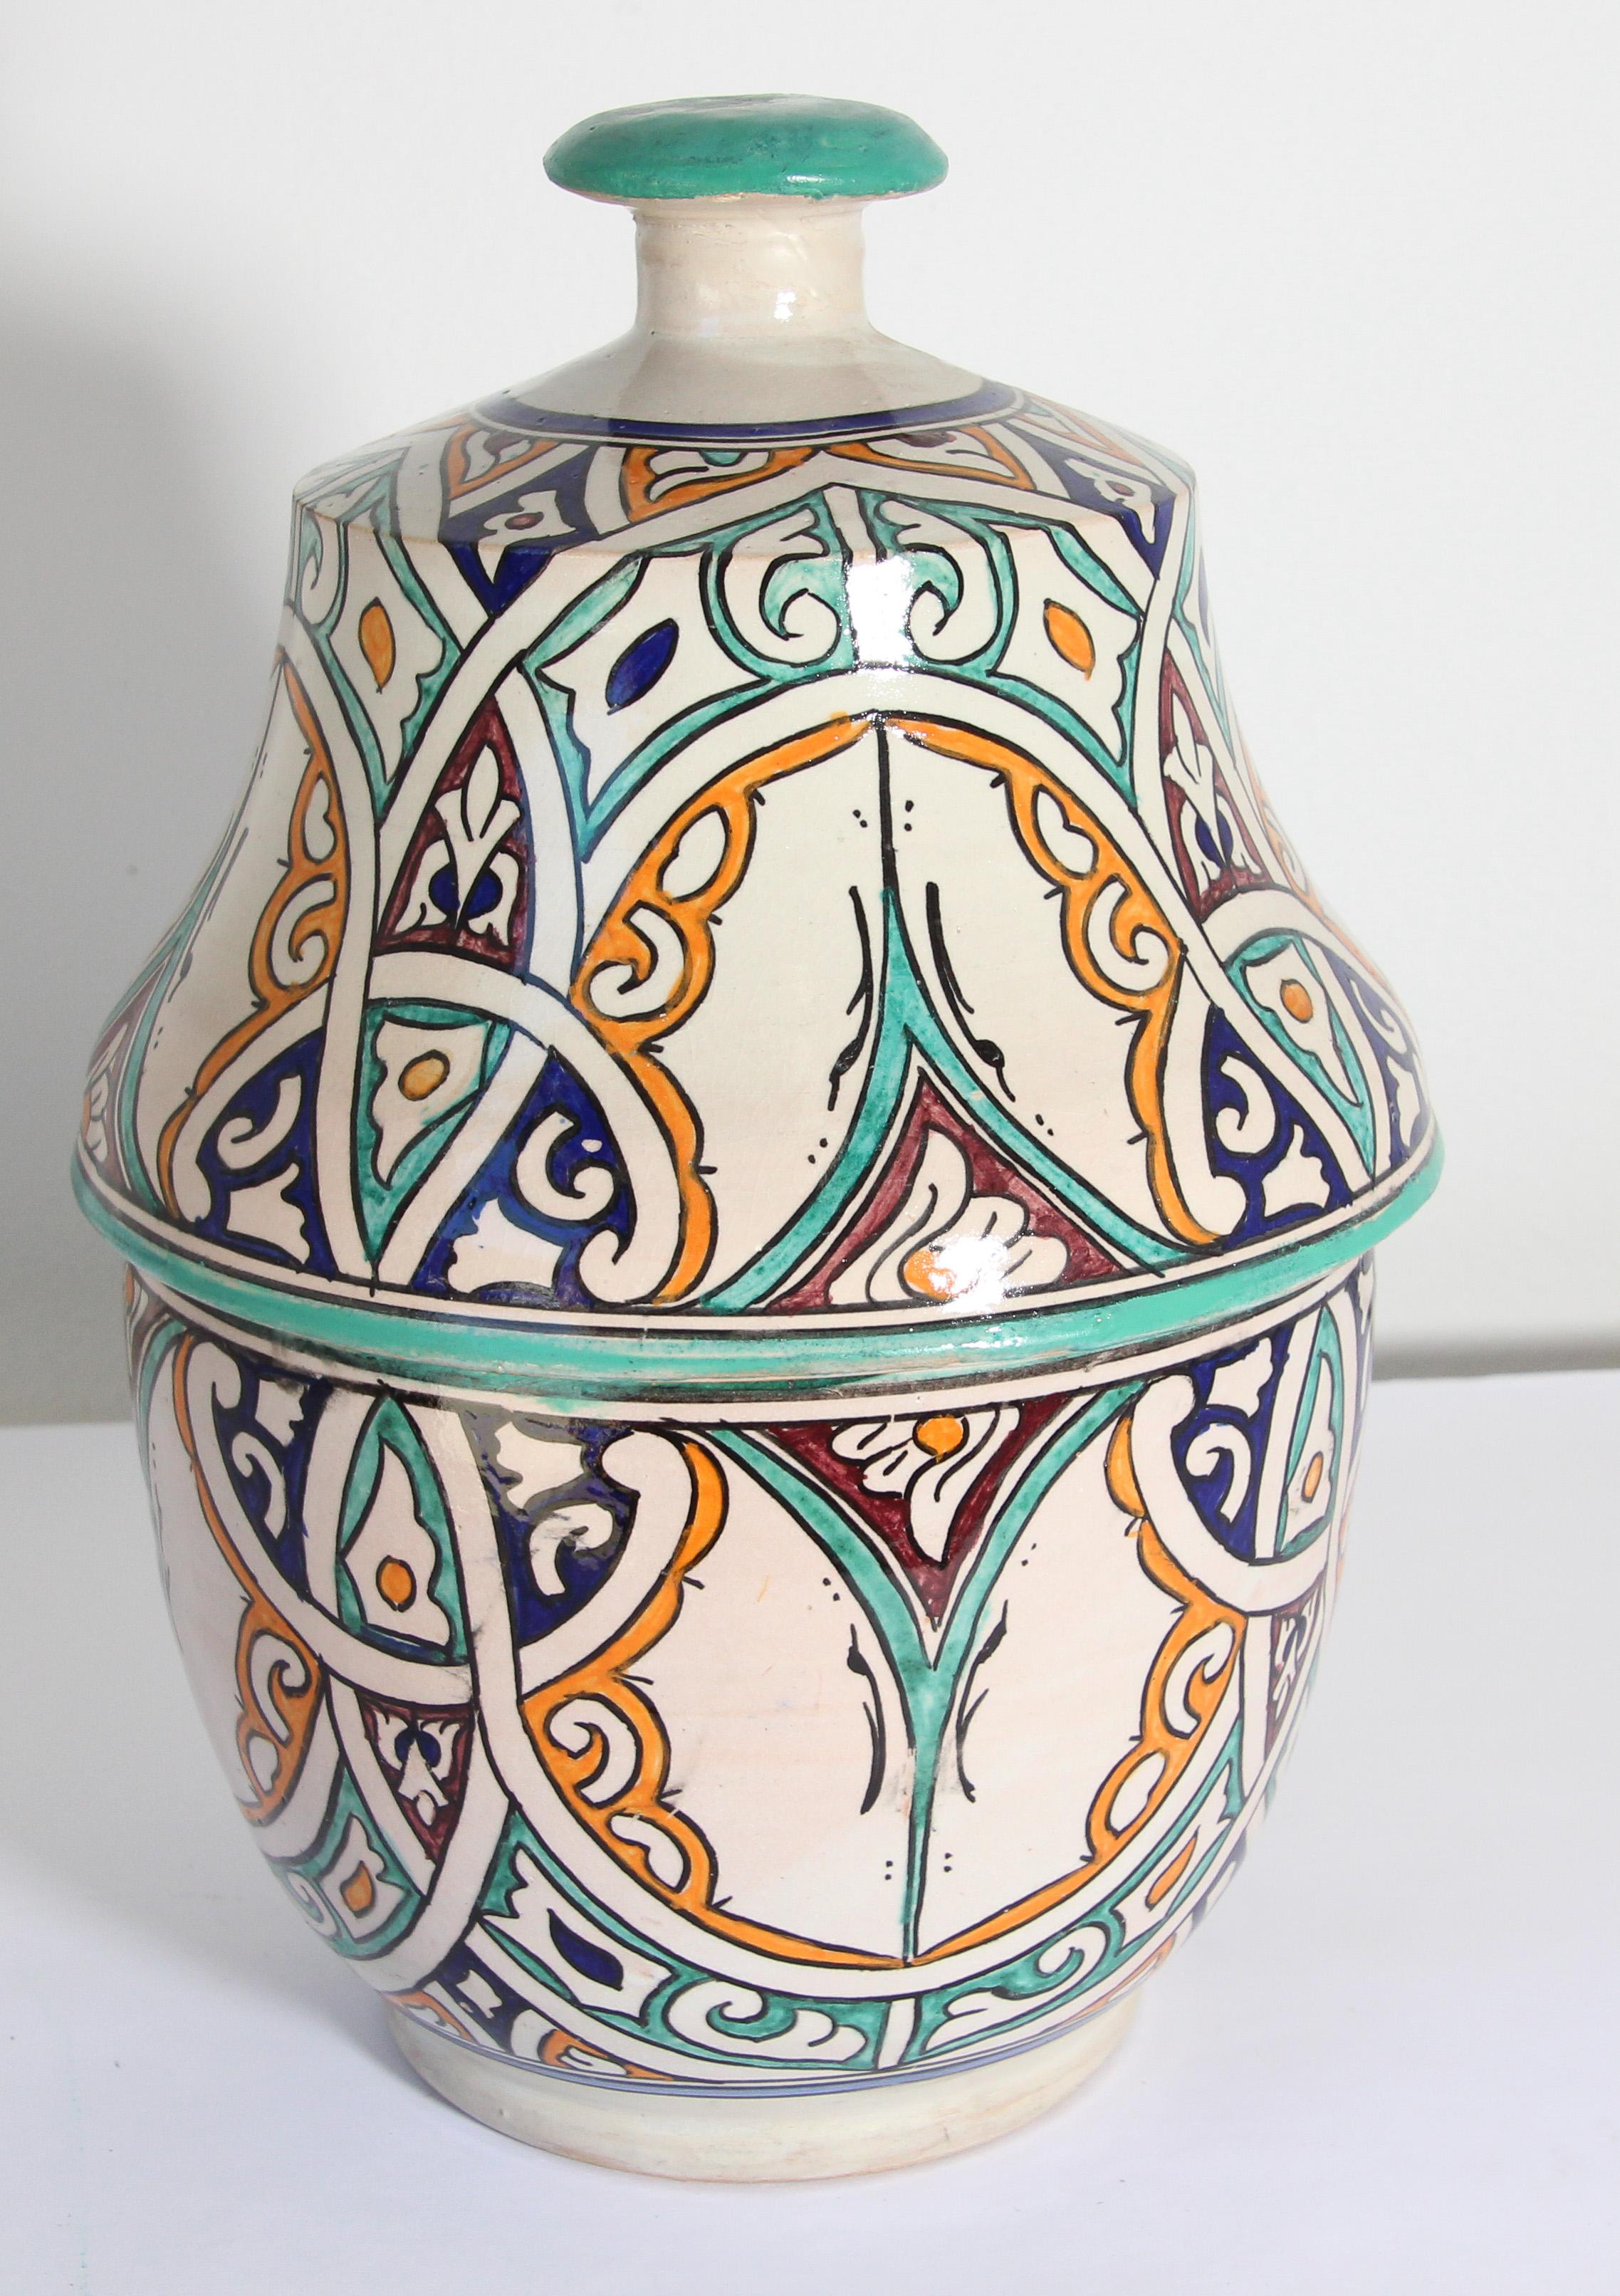 Moroccan glazed polychrome ceramic jar tureen with cover.
Hand painted ceramic Jubbana, handcrafted by skilled Moroccan artisans in Fez Morocco.
Moorish designs in turquoise, cobalt blue, teal, saffron yellow, prune and ivory colors.
Size: 14